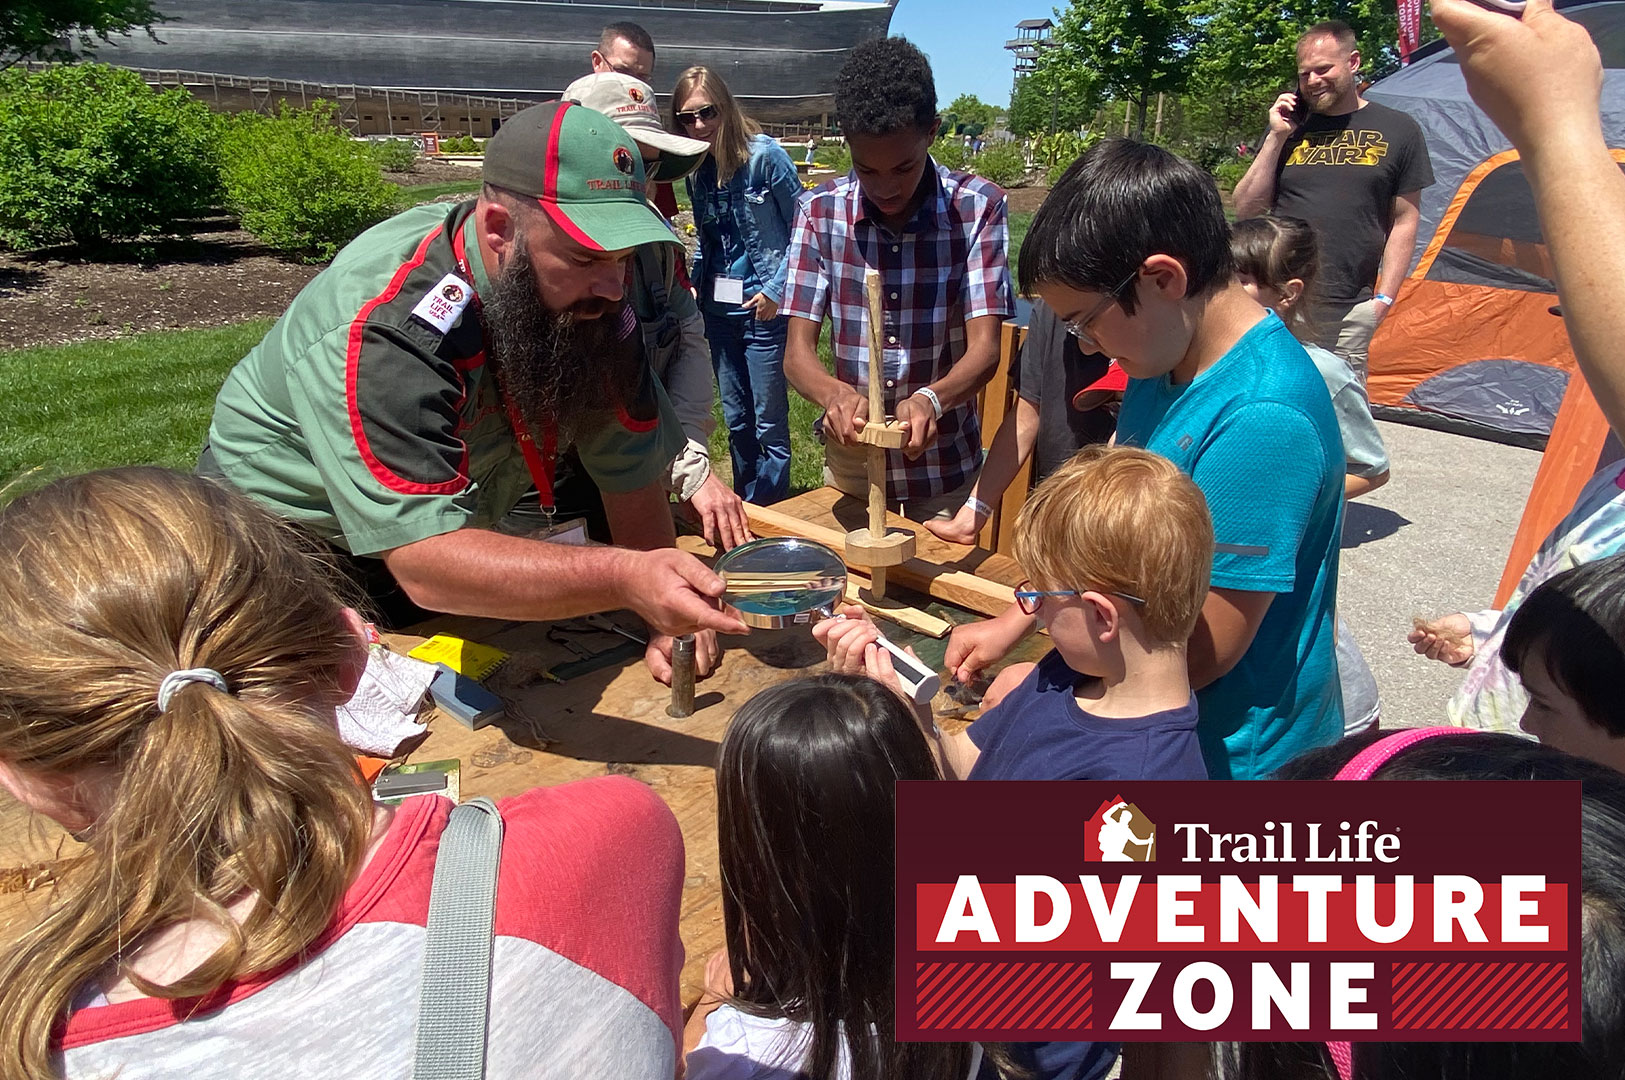 Trail Life USA Partners With Homeschool Conference, Sharing ‘Adventure